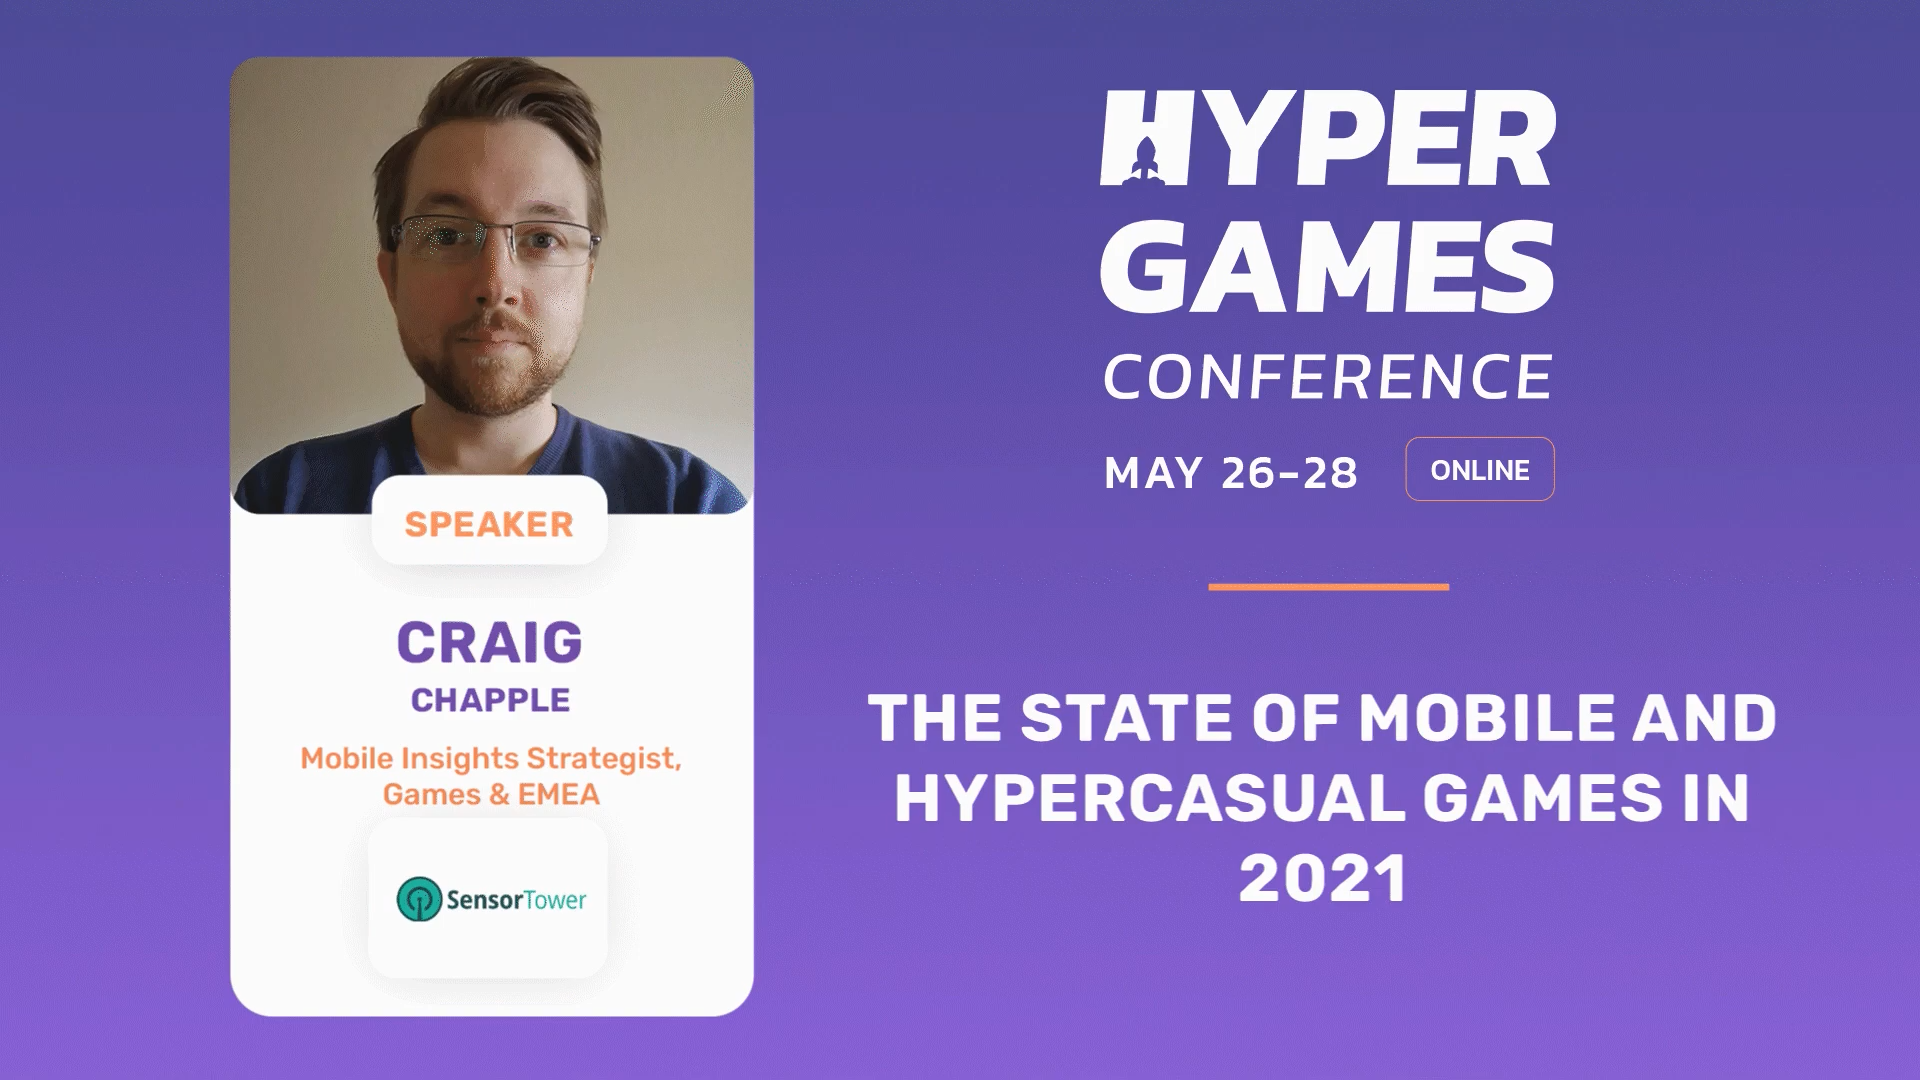 The State of Mobile and Hypercasual Games in 2021